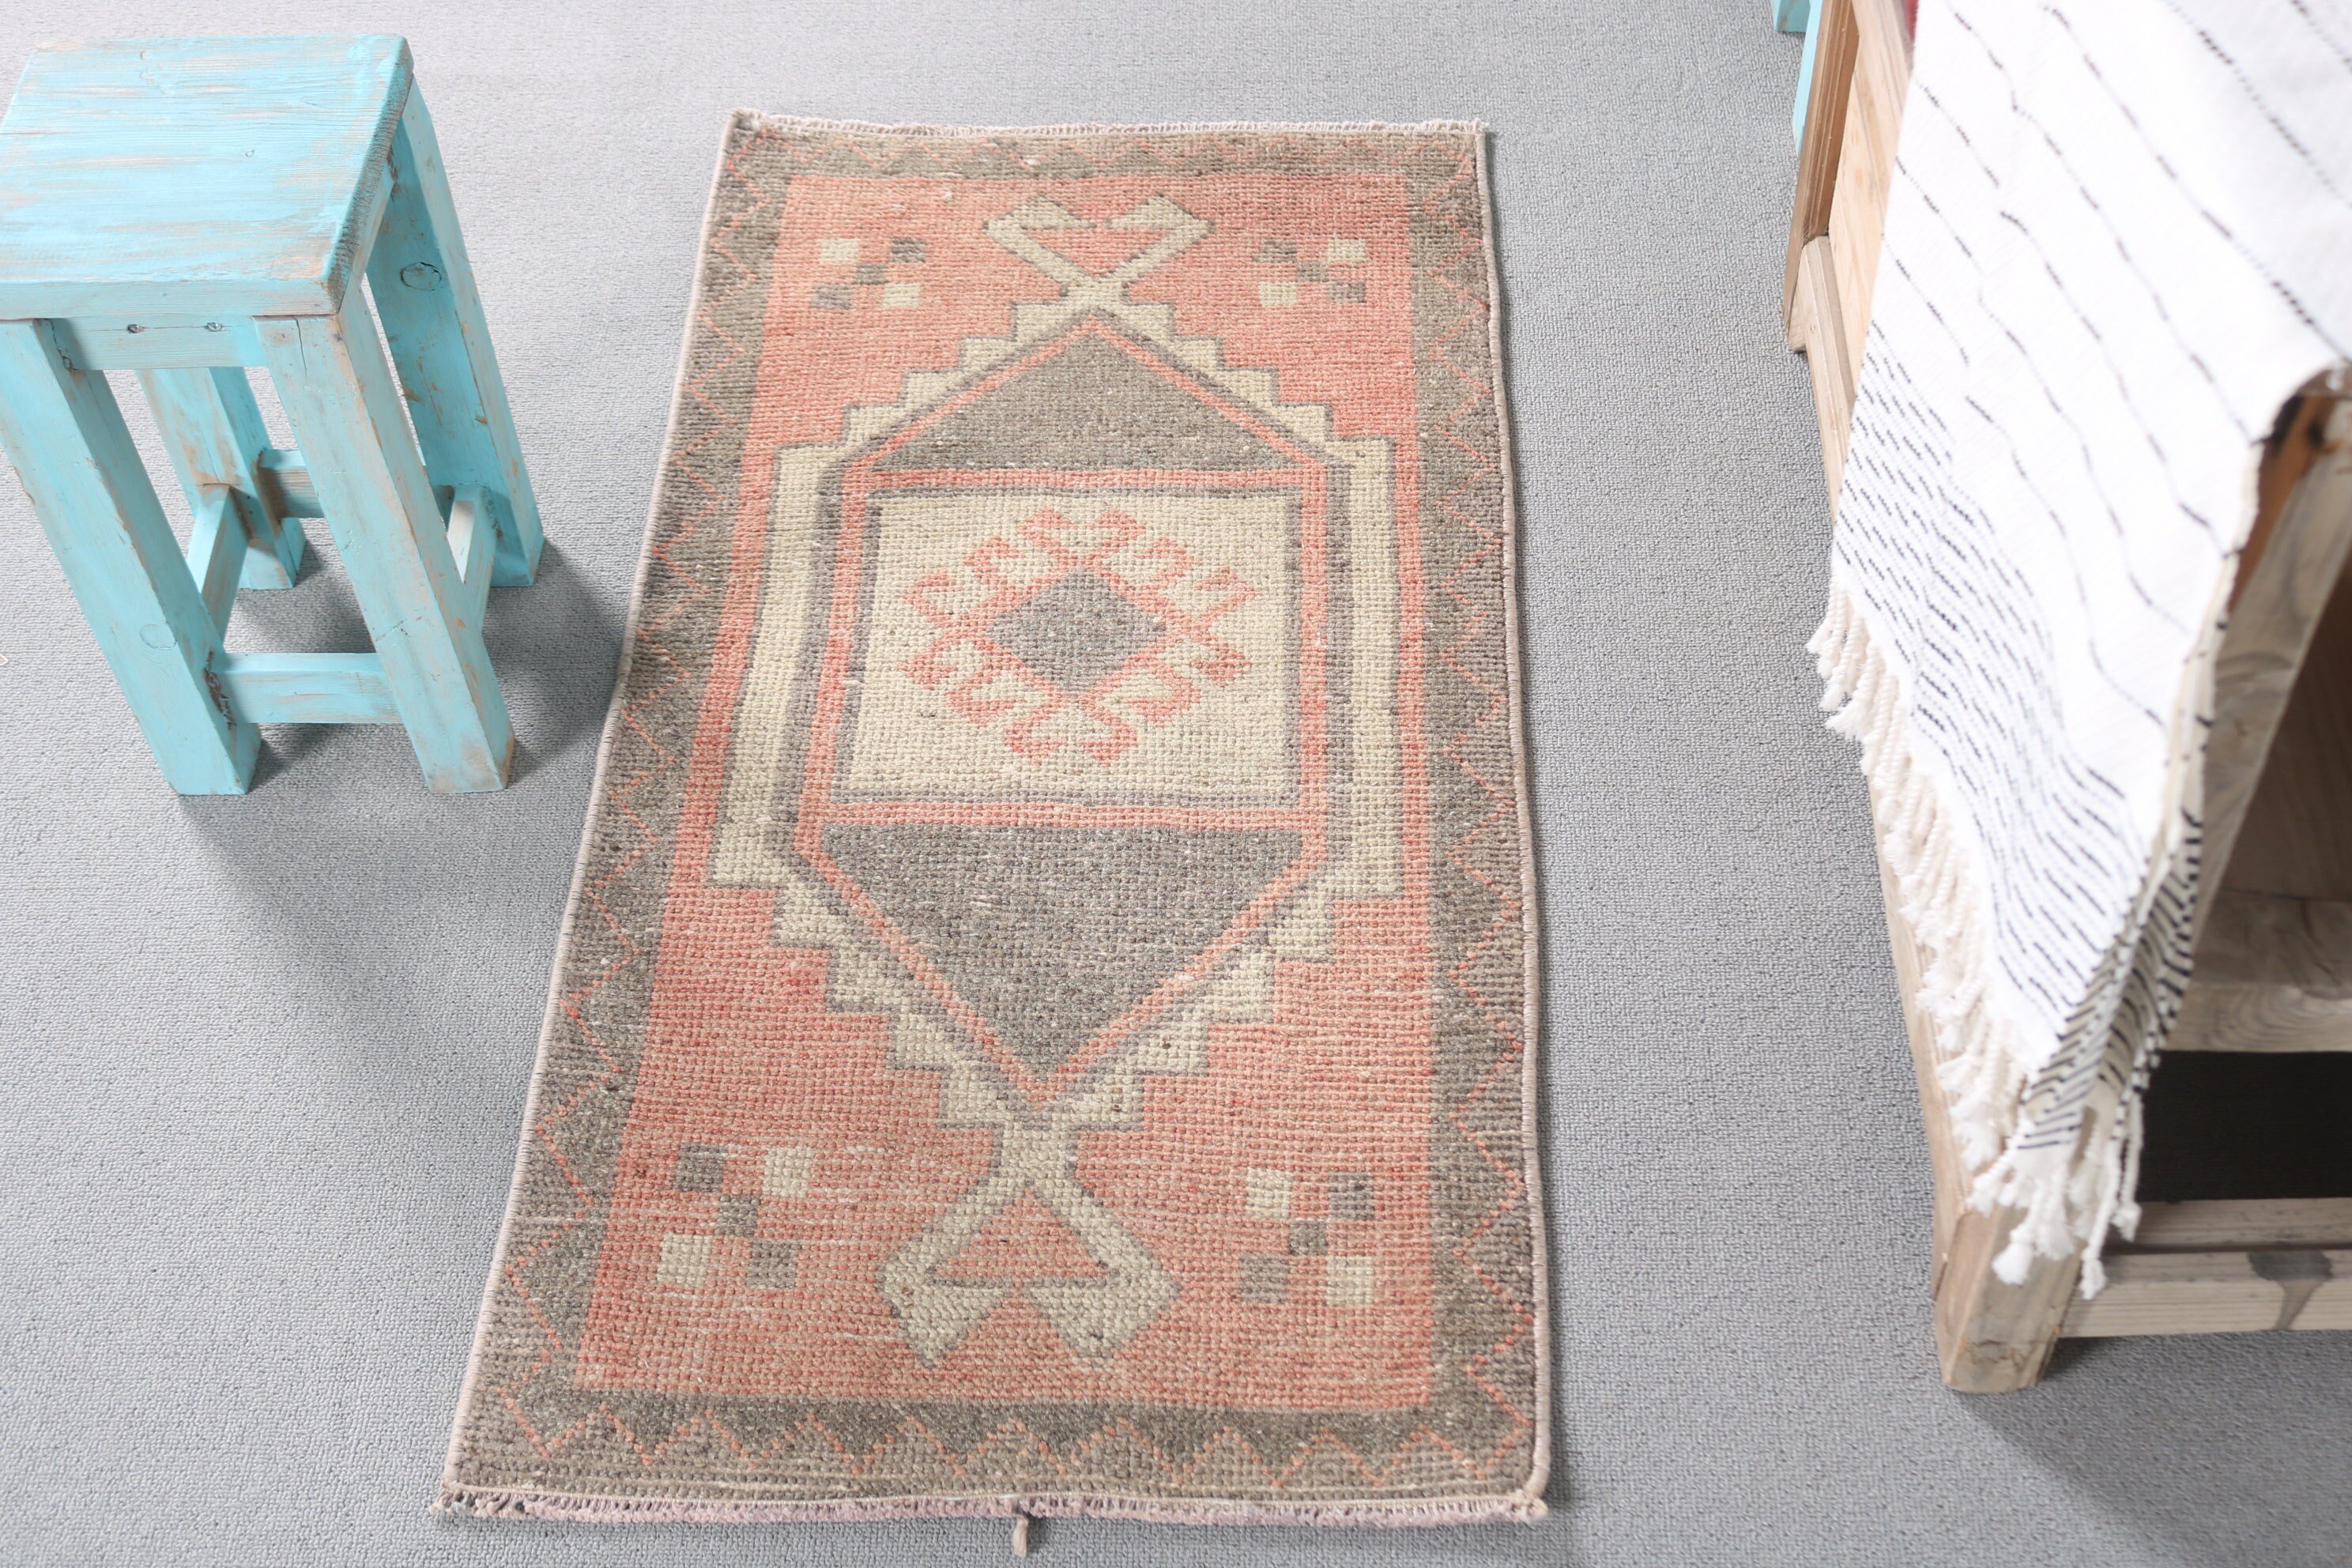 Bathroom Rug, Turkish Rug, Entry Rug, Moroccan Rug, Vintage Rugs, Rugs for Car Mat, Brown Oushak Rugs, 1.7x3.4 ft Small Rugs